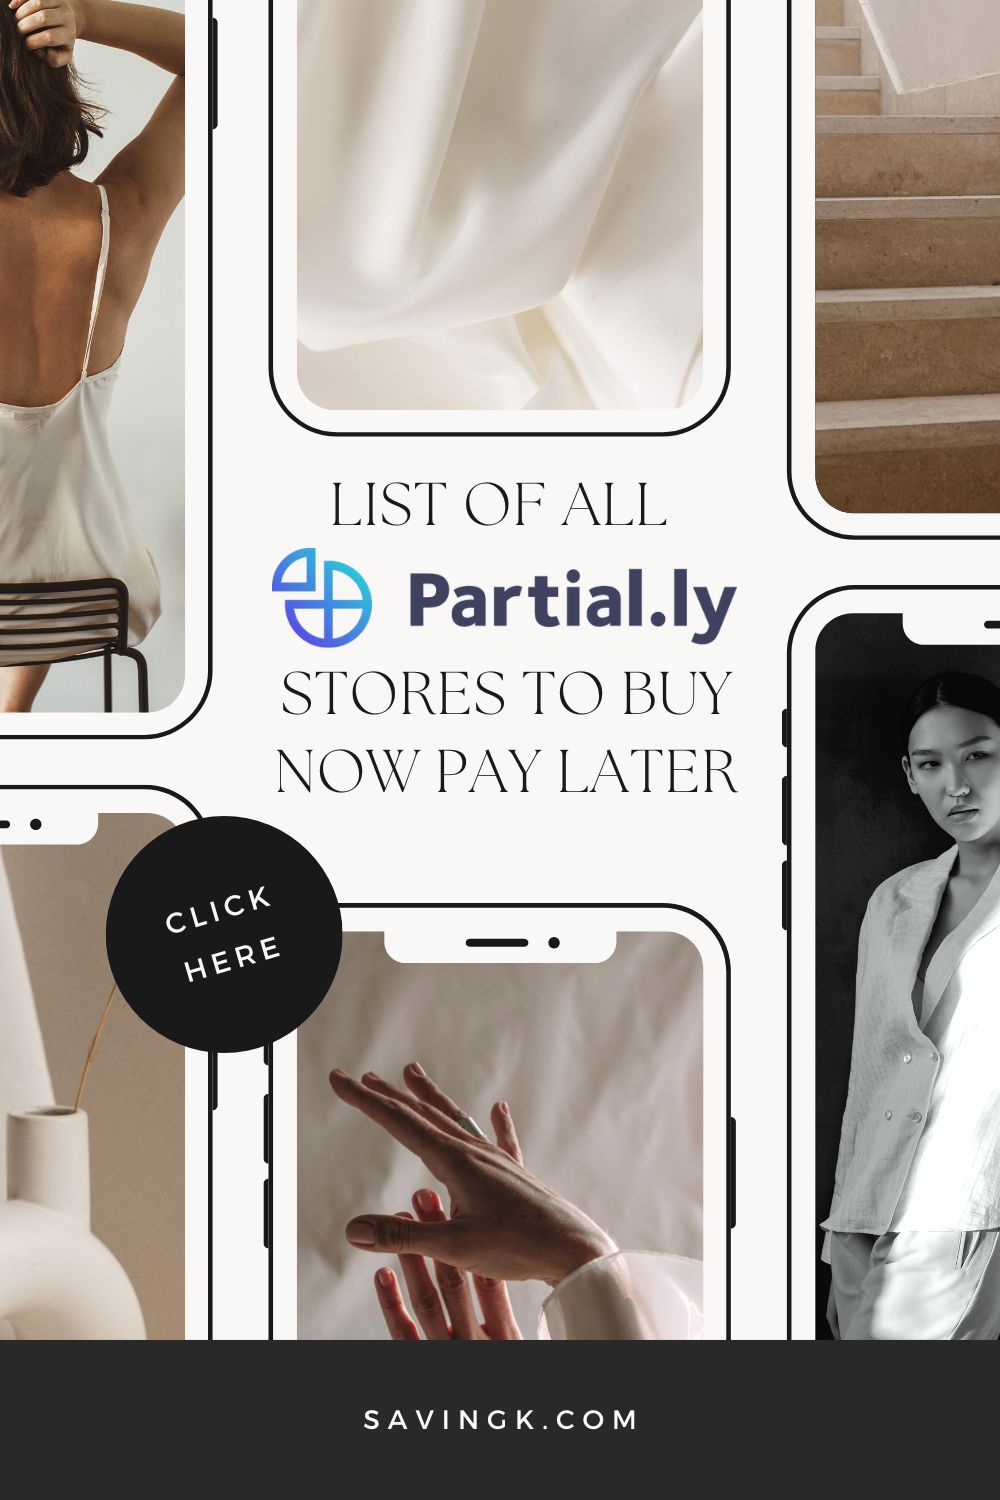 Full List of Partial.ly Stores